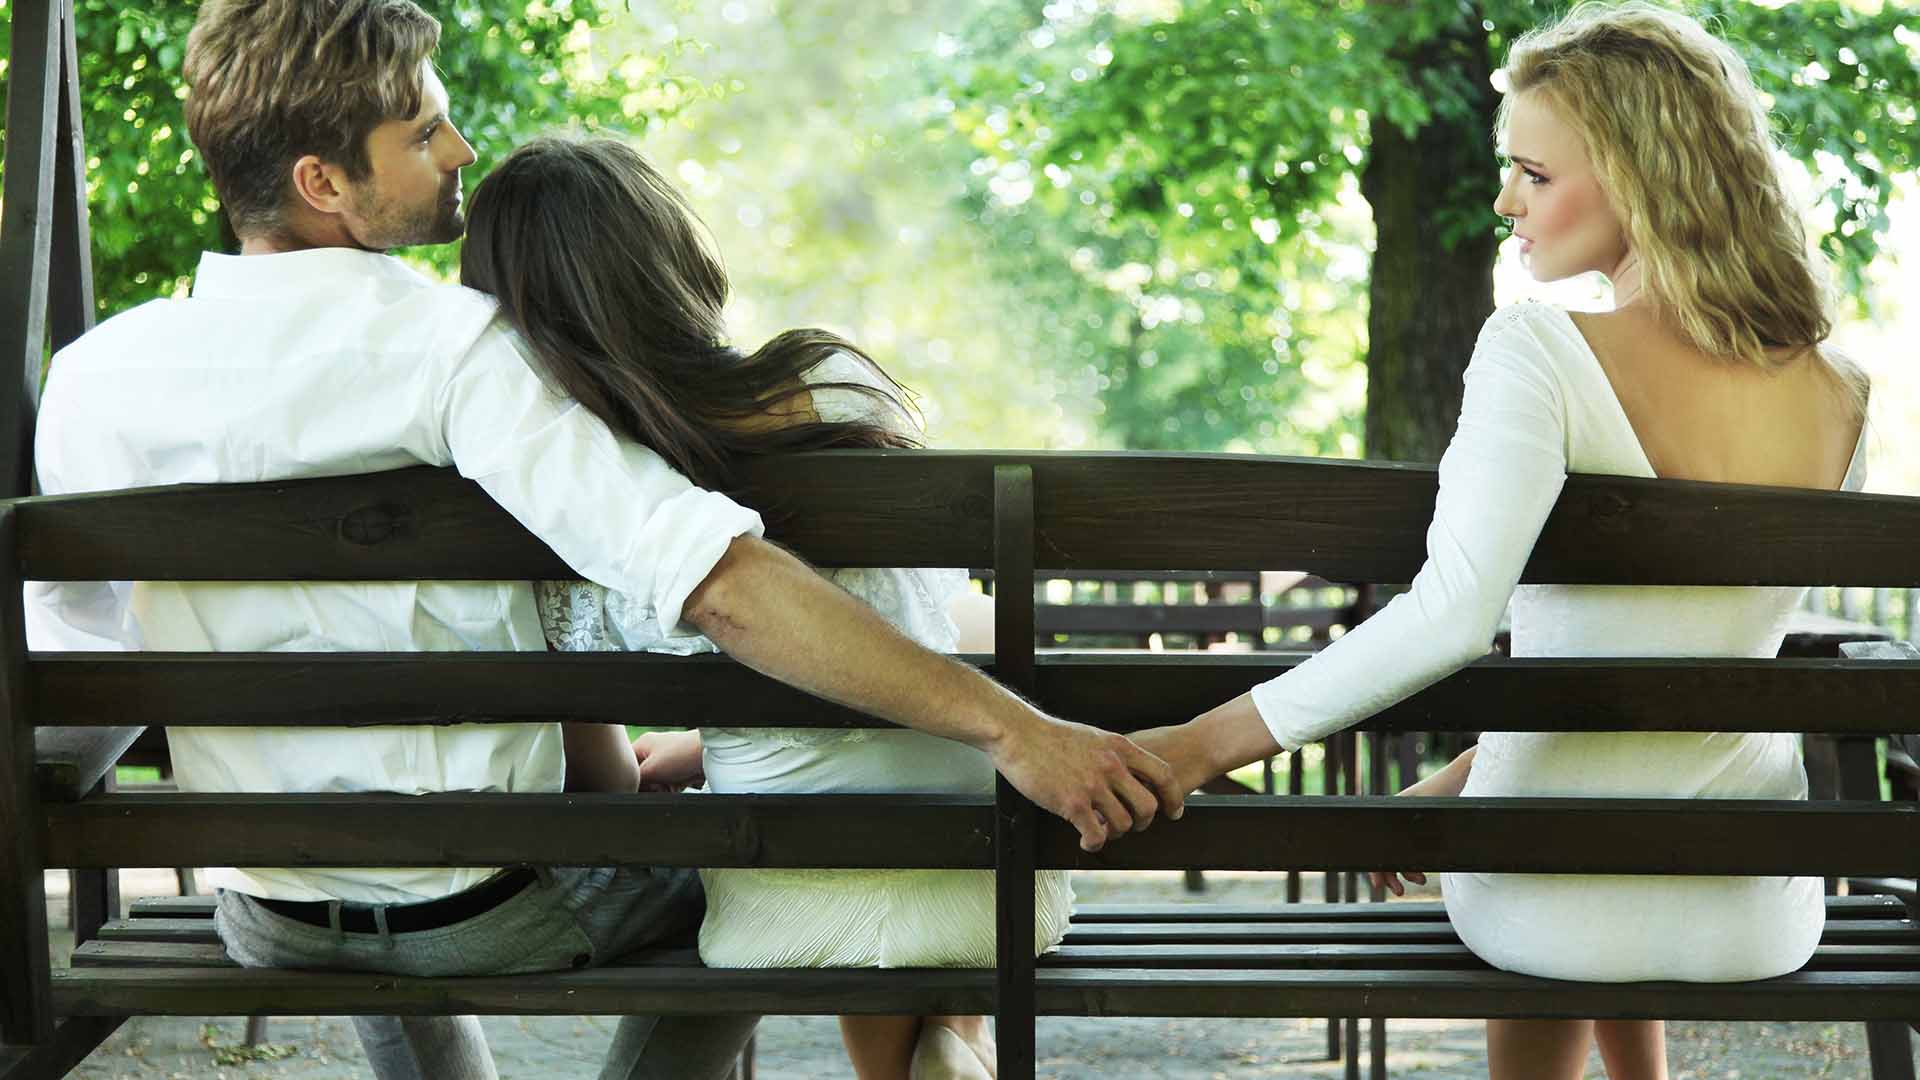 Brunette man and blonde woman sitting on bench at a park, holding hands behind brunette woman resting head on man's shoulder.